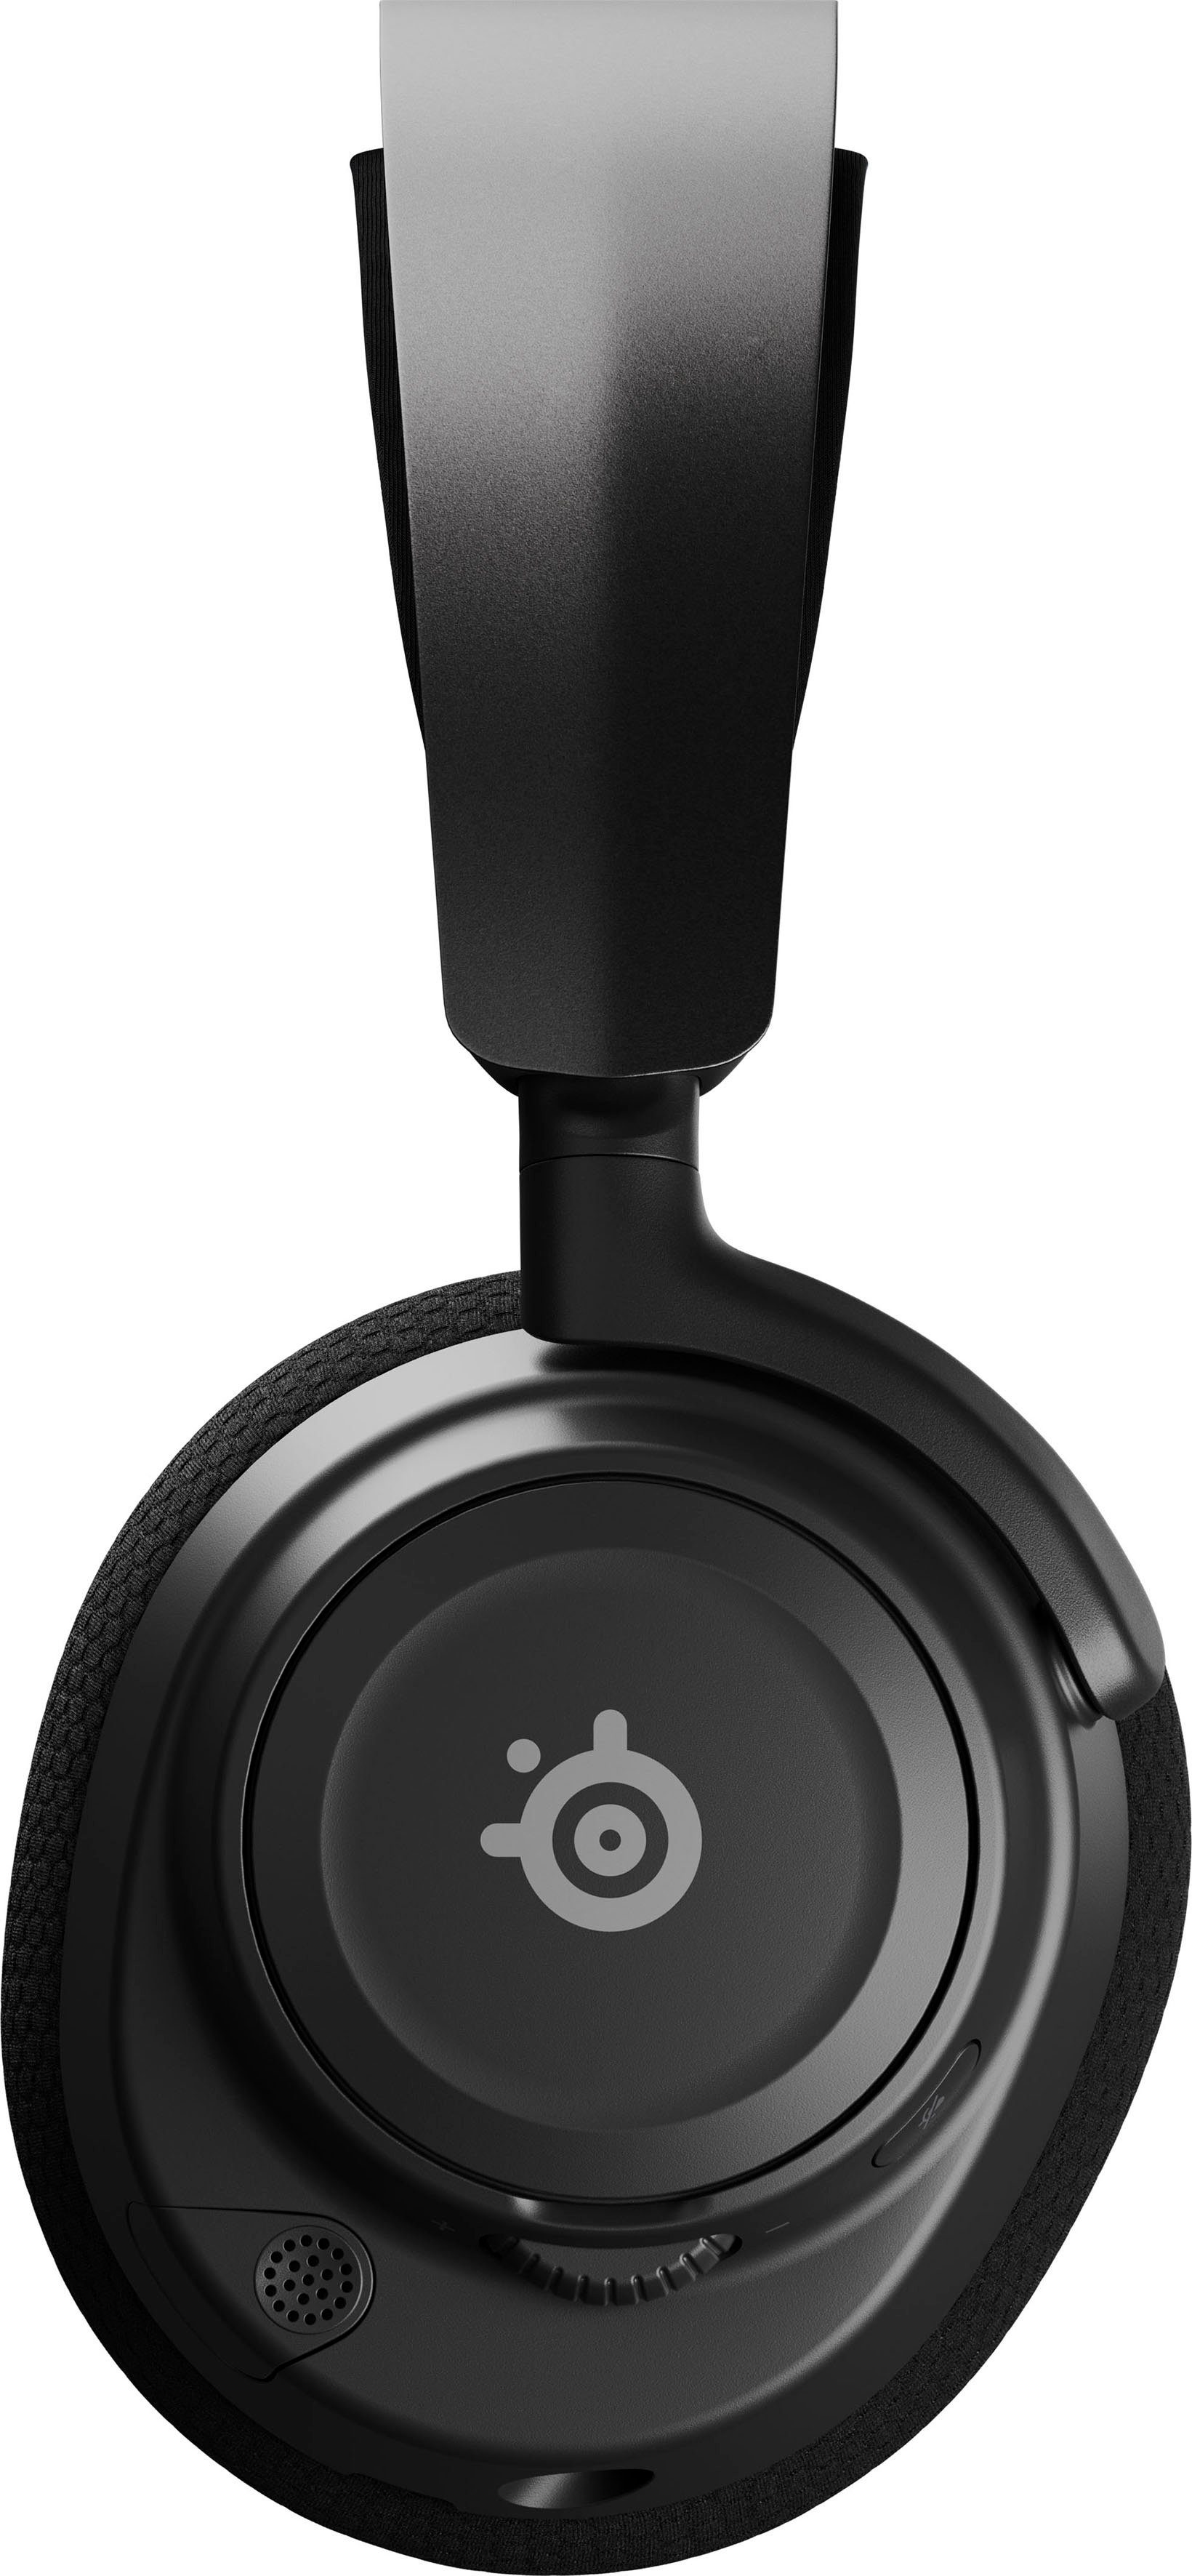 SteelSeries Arctis Nova 7P Gaming-Headset Bluetooth, Wireless) (Noise-Cancelling